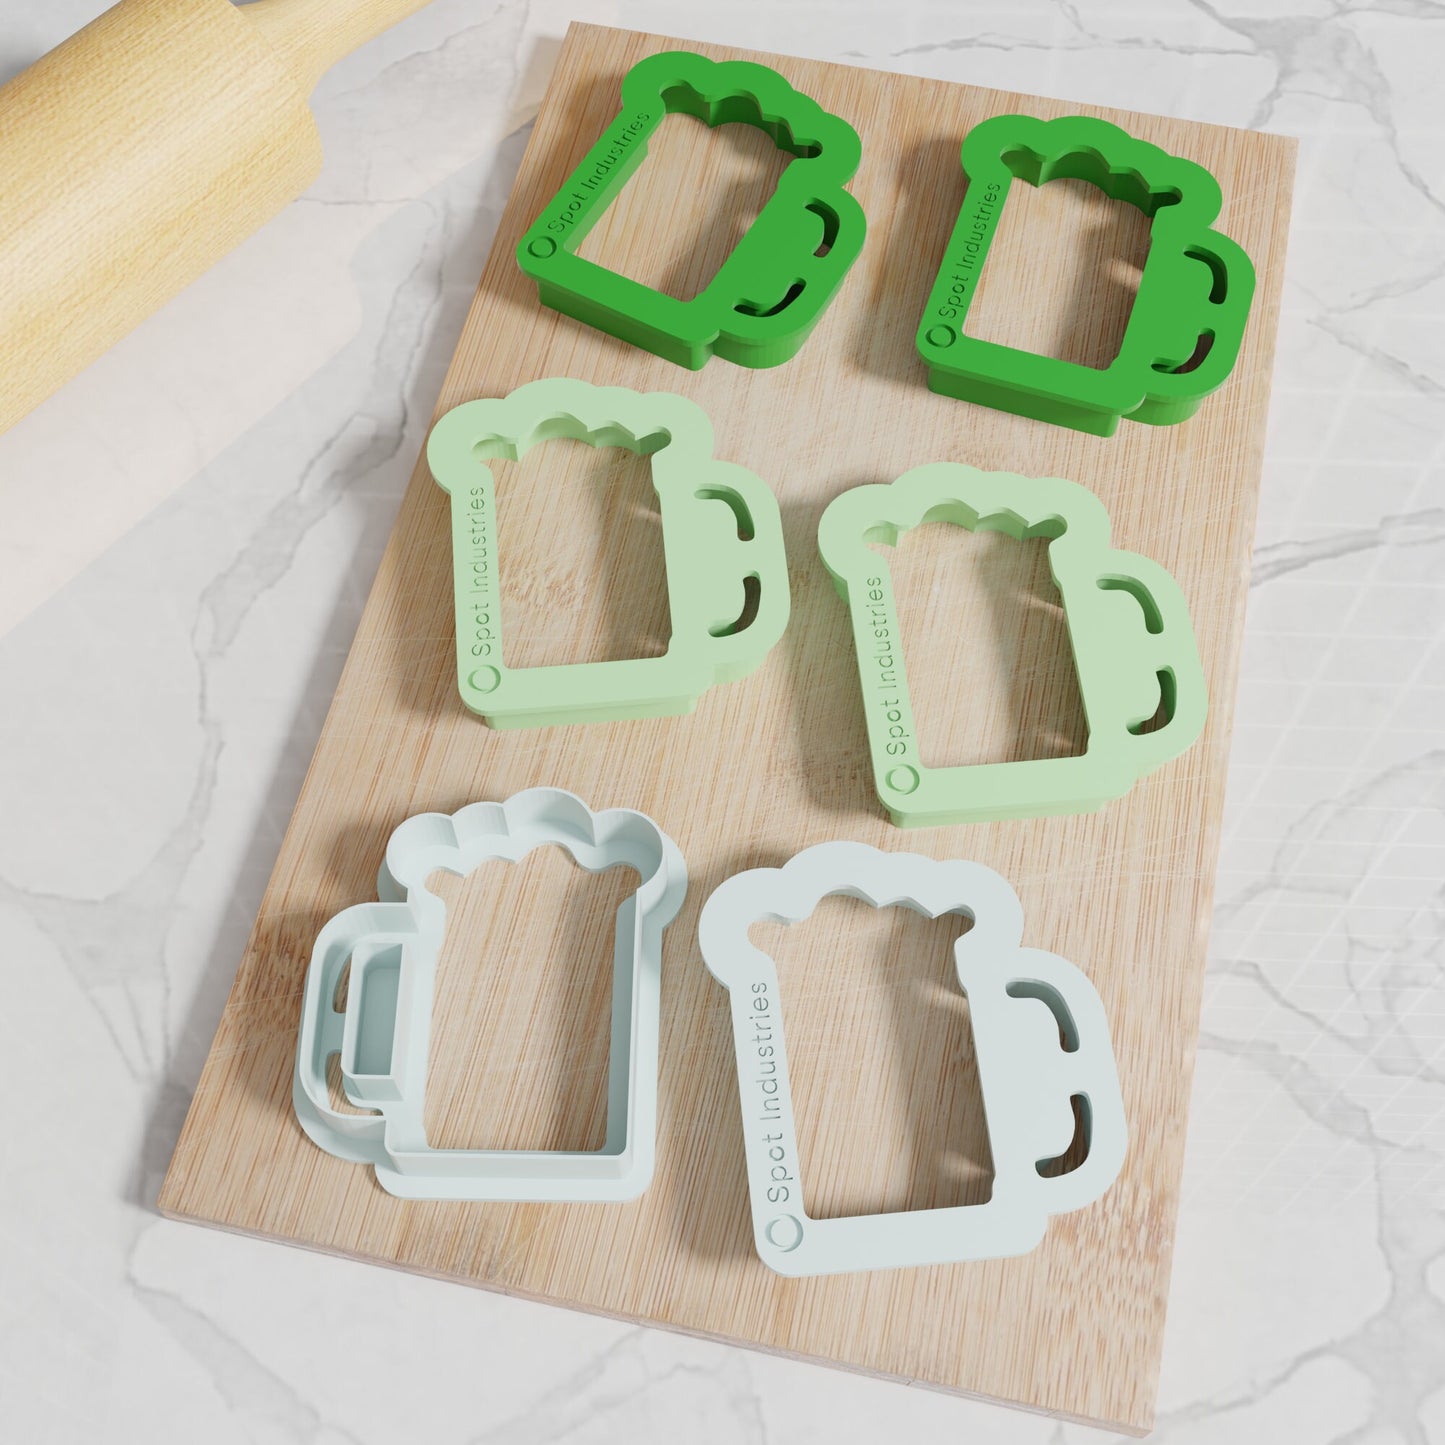 St. Patrick's Day Beer Cookie Cutter. Multiple Sizes And Colors. Beer Cookie Cutter Matches Our St. Patrick's Cutters